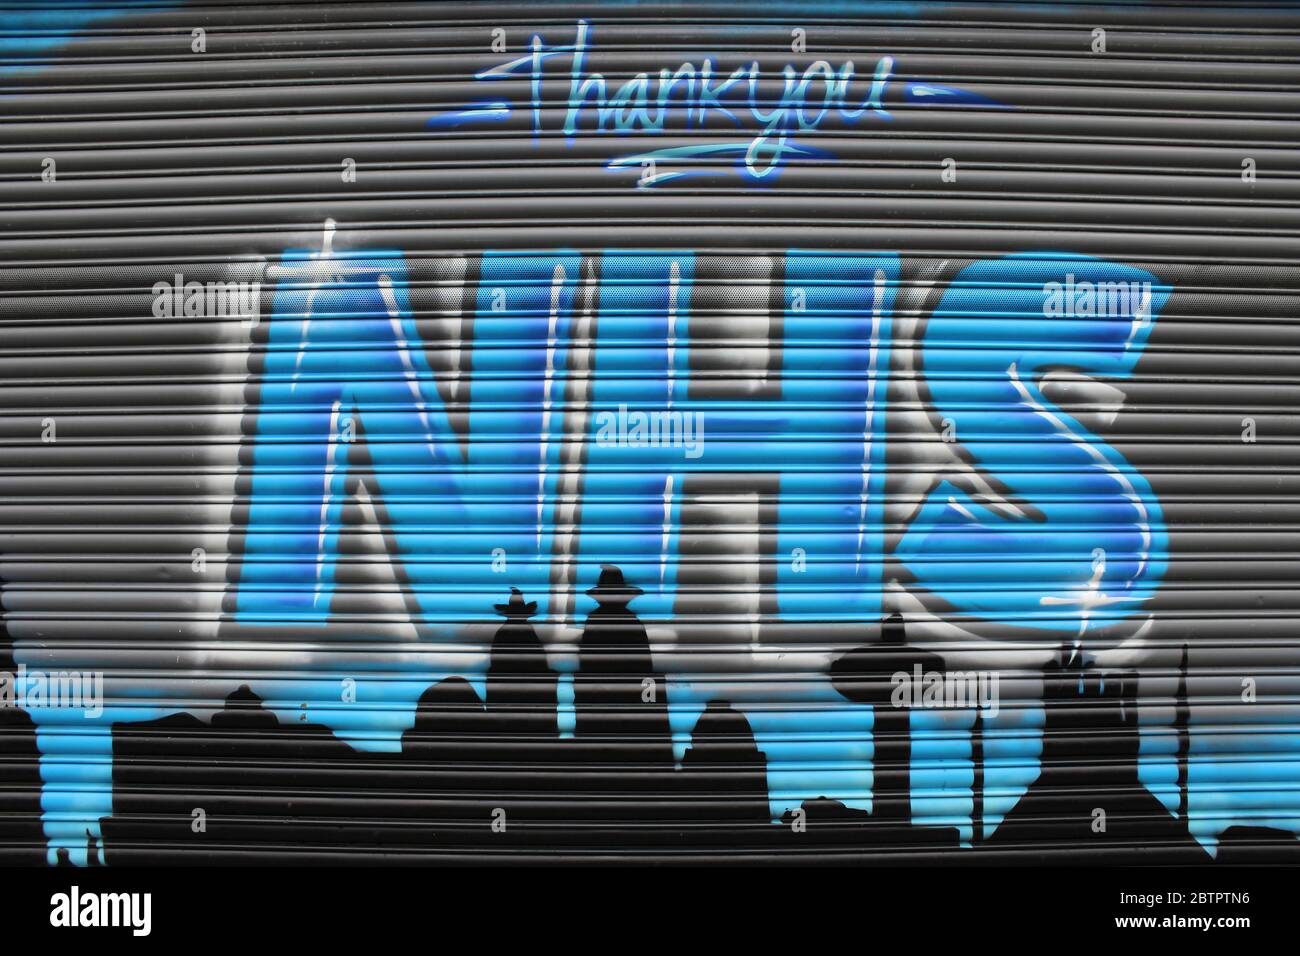 Thank You NHS Design On Shop Shutter, Liverpool, UK Stock Photo